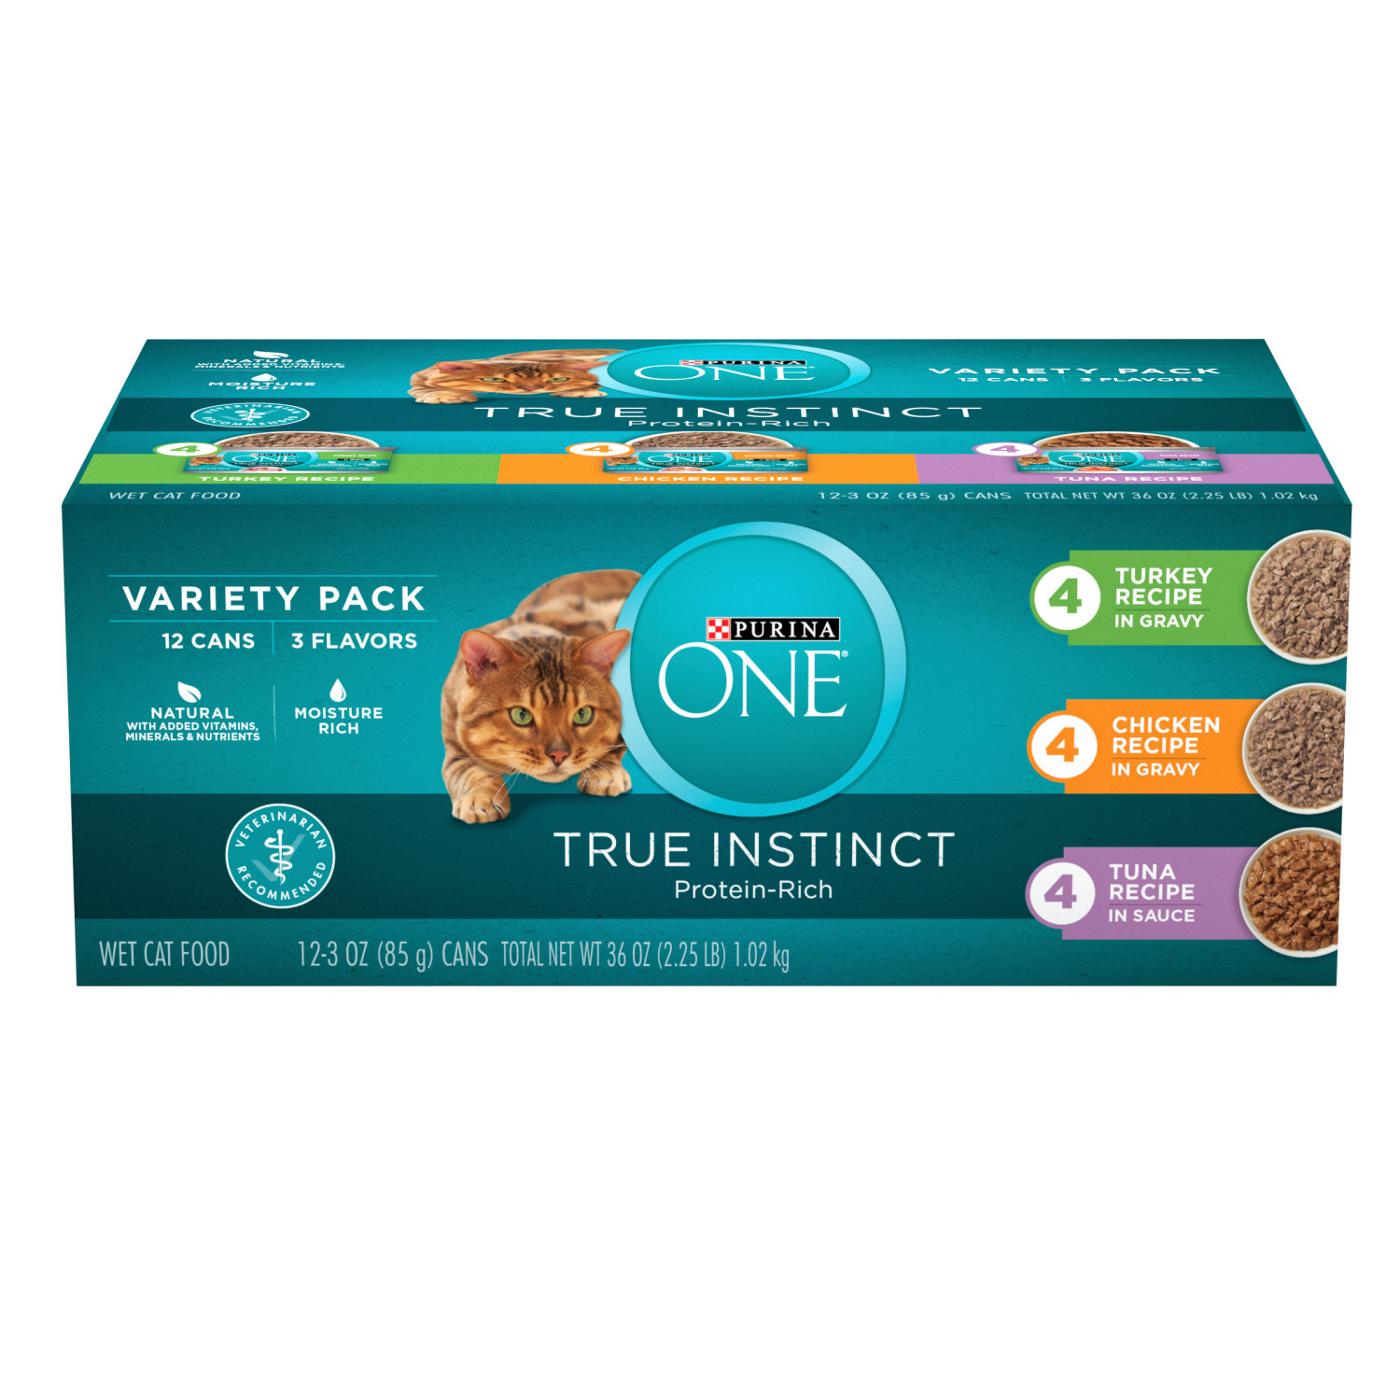 Purina ONE Purina ONE Natural, High Protein Wet Cat Food Variety Pack, True Instinct Turkey, Chicken and Tuna Recipes; image 1 of 10